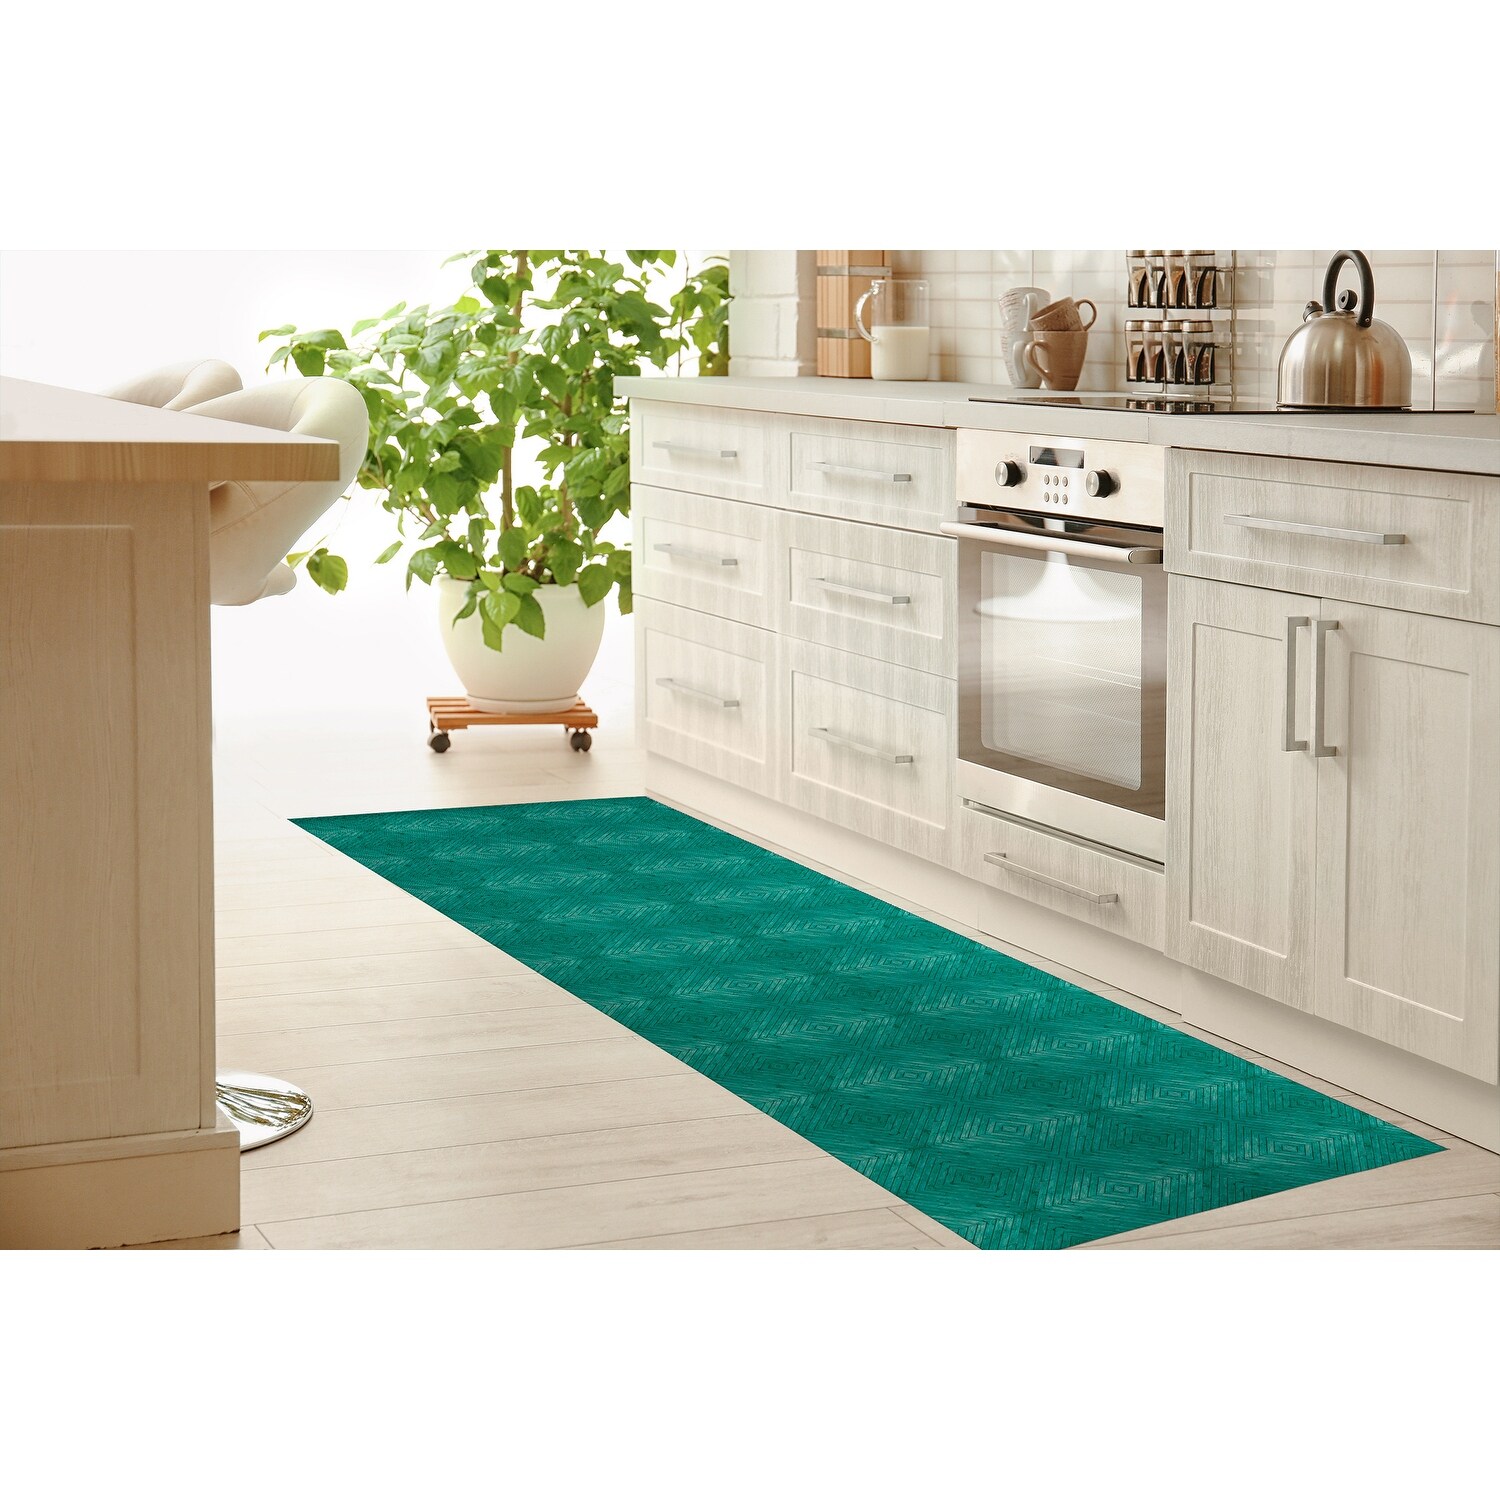 https://ak1.ostkcdn.com/images/products/is/images/direct/ac0a5d2c84c9f8592fd429564cf48ce09e9bc318/TURQUOISE-WOOD-Kitchen-Mat-By-Michelle-Parascandolo.jpg